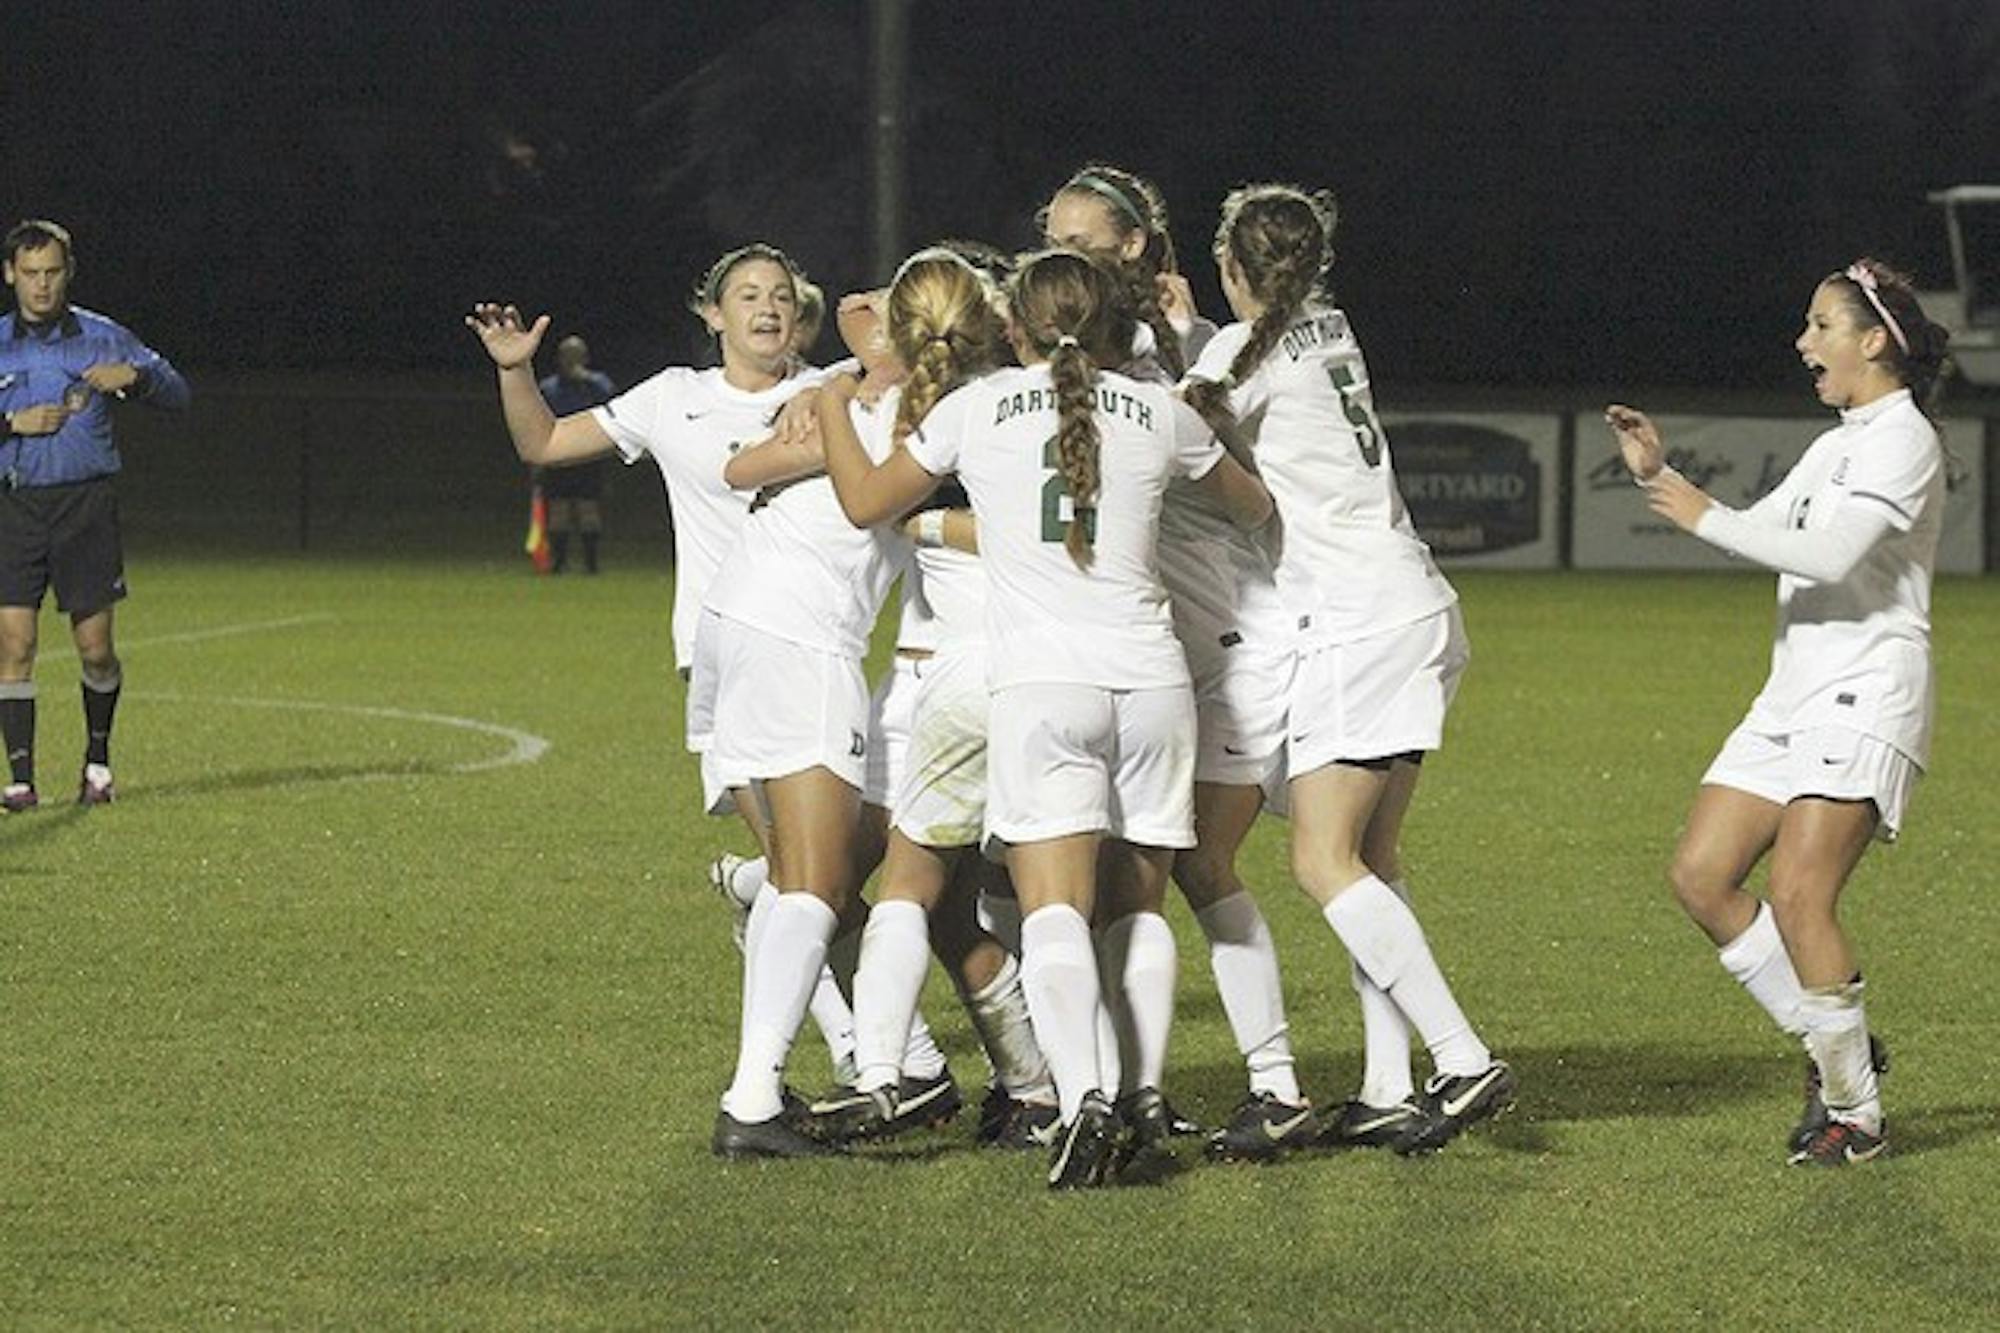 The women's soccer team went 13-4 (6-1 Ivy) in 2012, a nine-win improvement from last season.